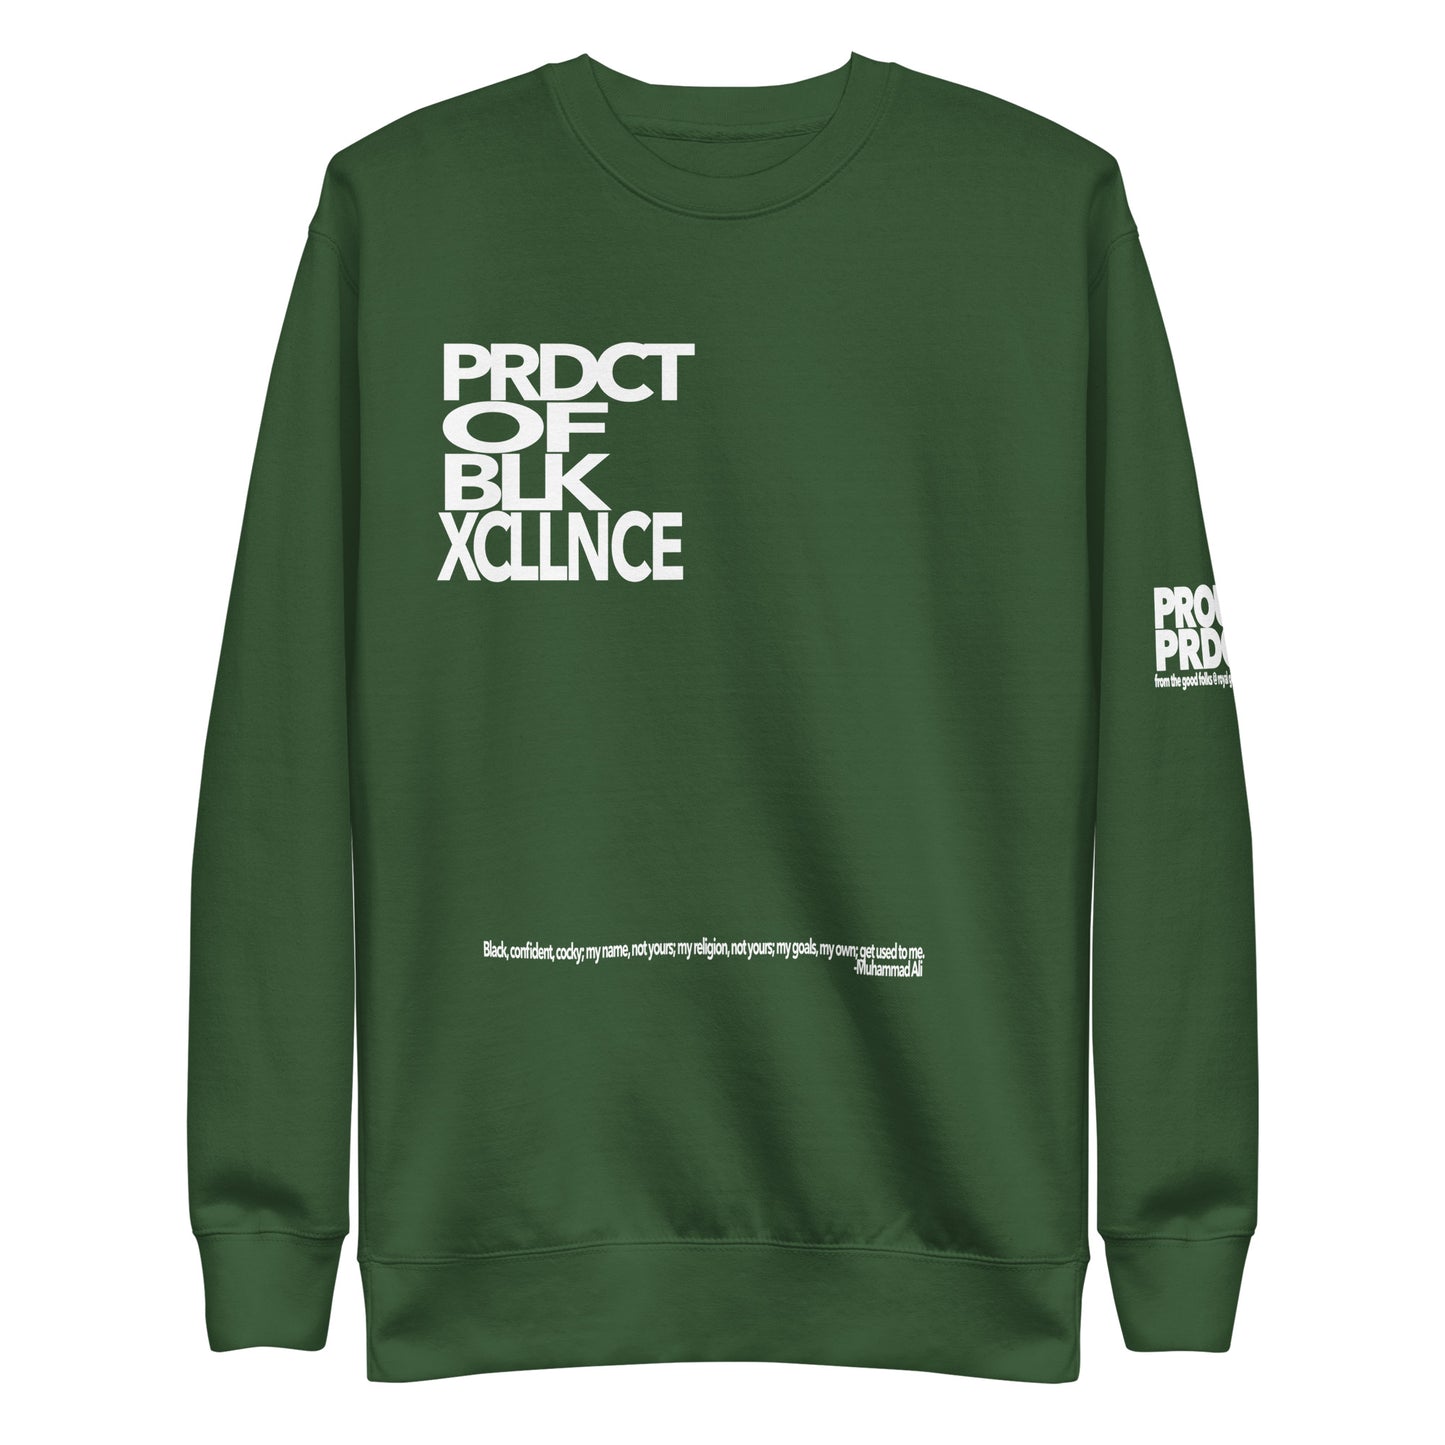 "Product of Black Excellence" Sweatshirt